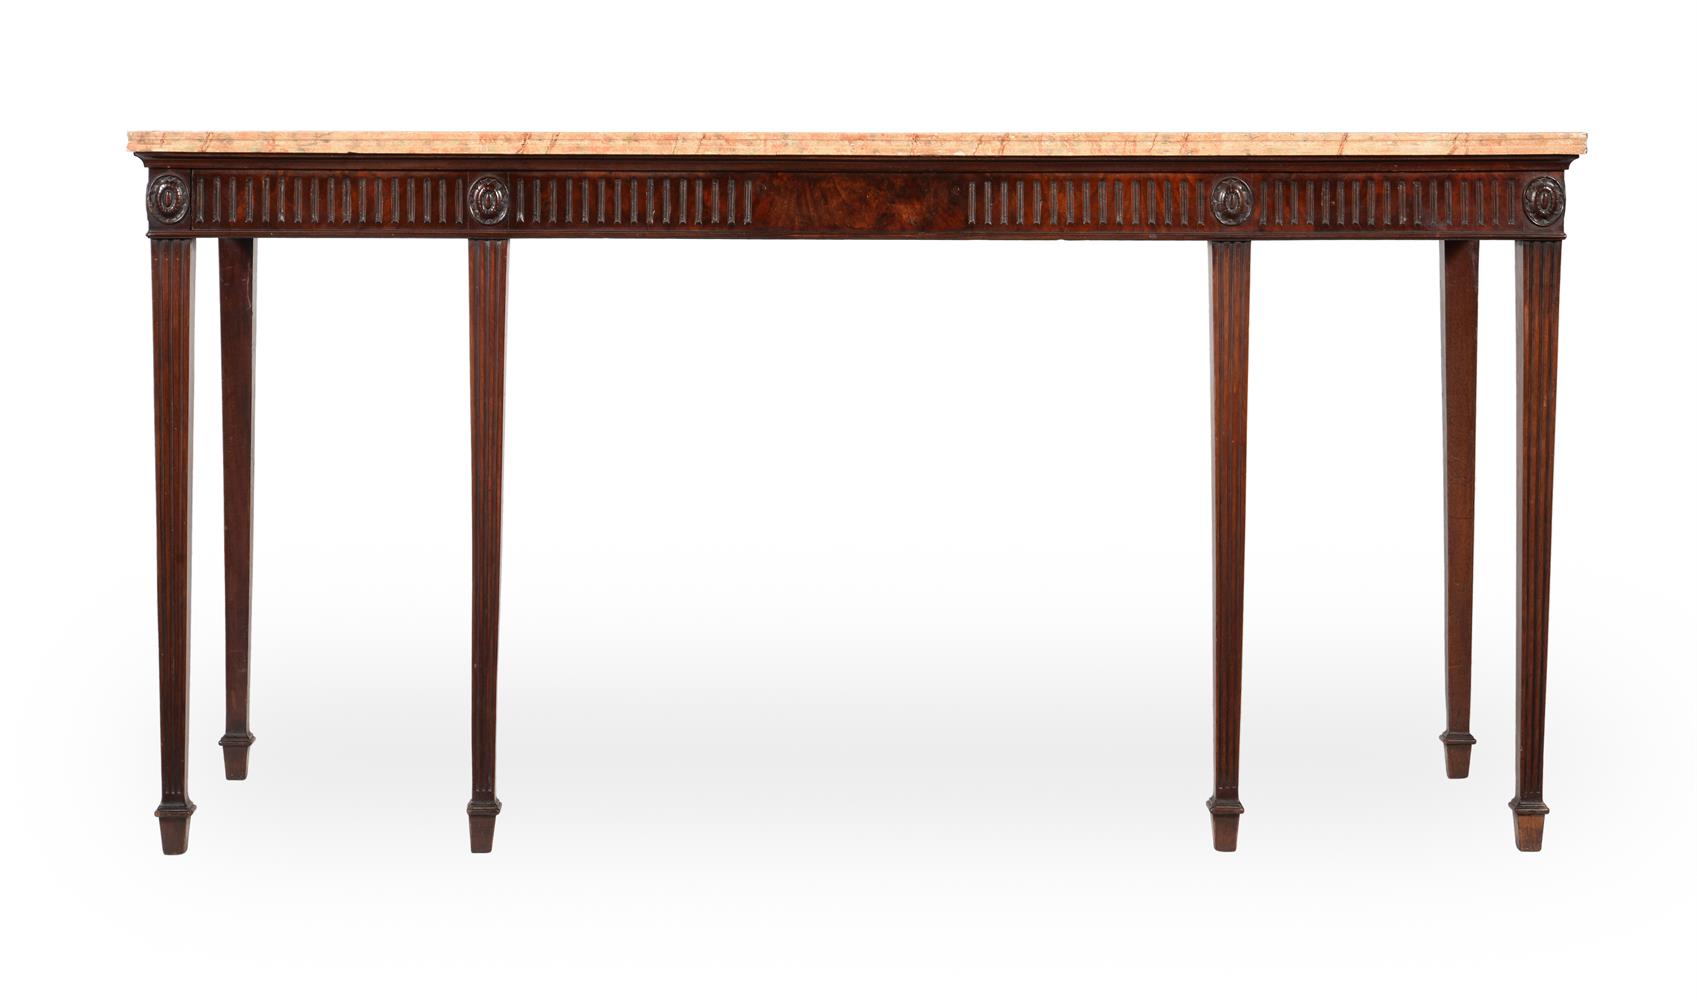 A GEORGE III MAHOGANY HALL OR SERVING TABLE, CIRCA 1790 - Image 2 of 4